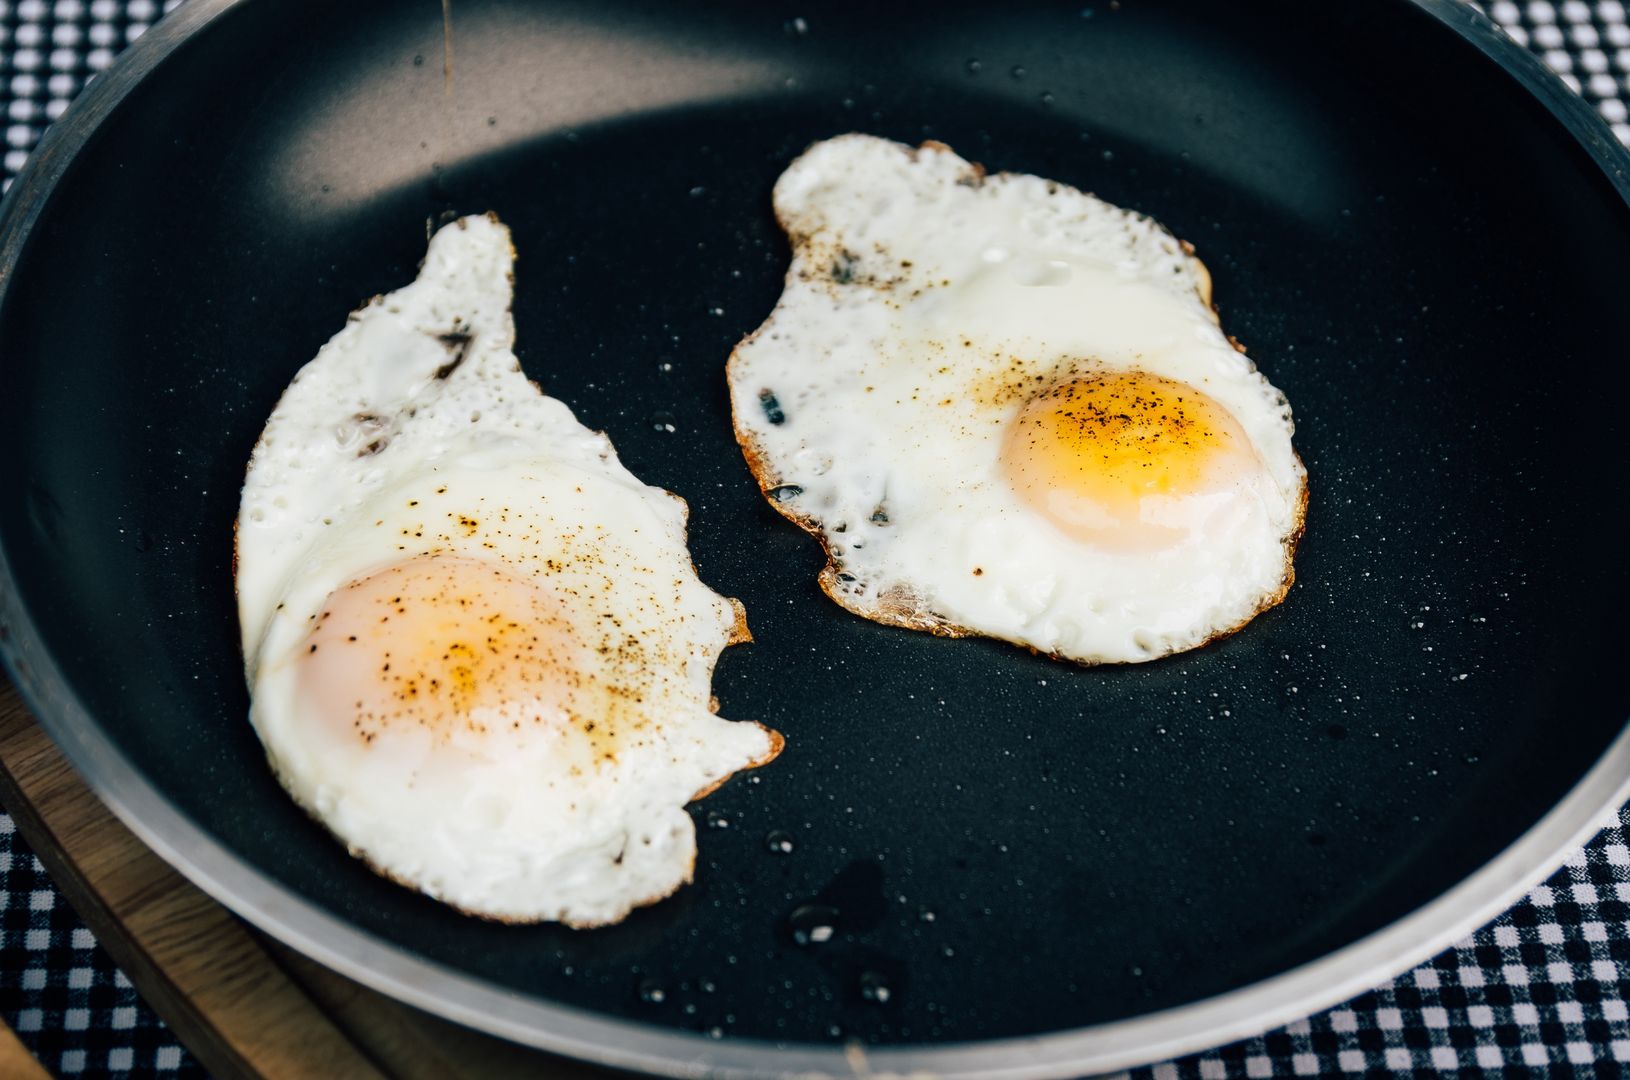 Choosing the right fats for frying eggs: Expert advice for a